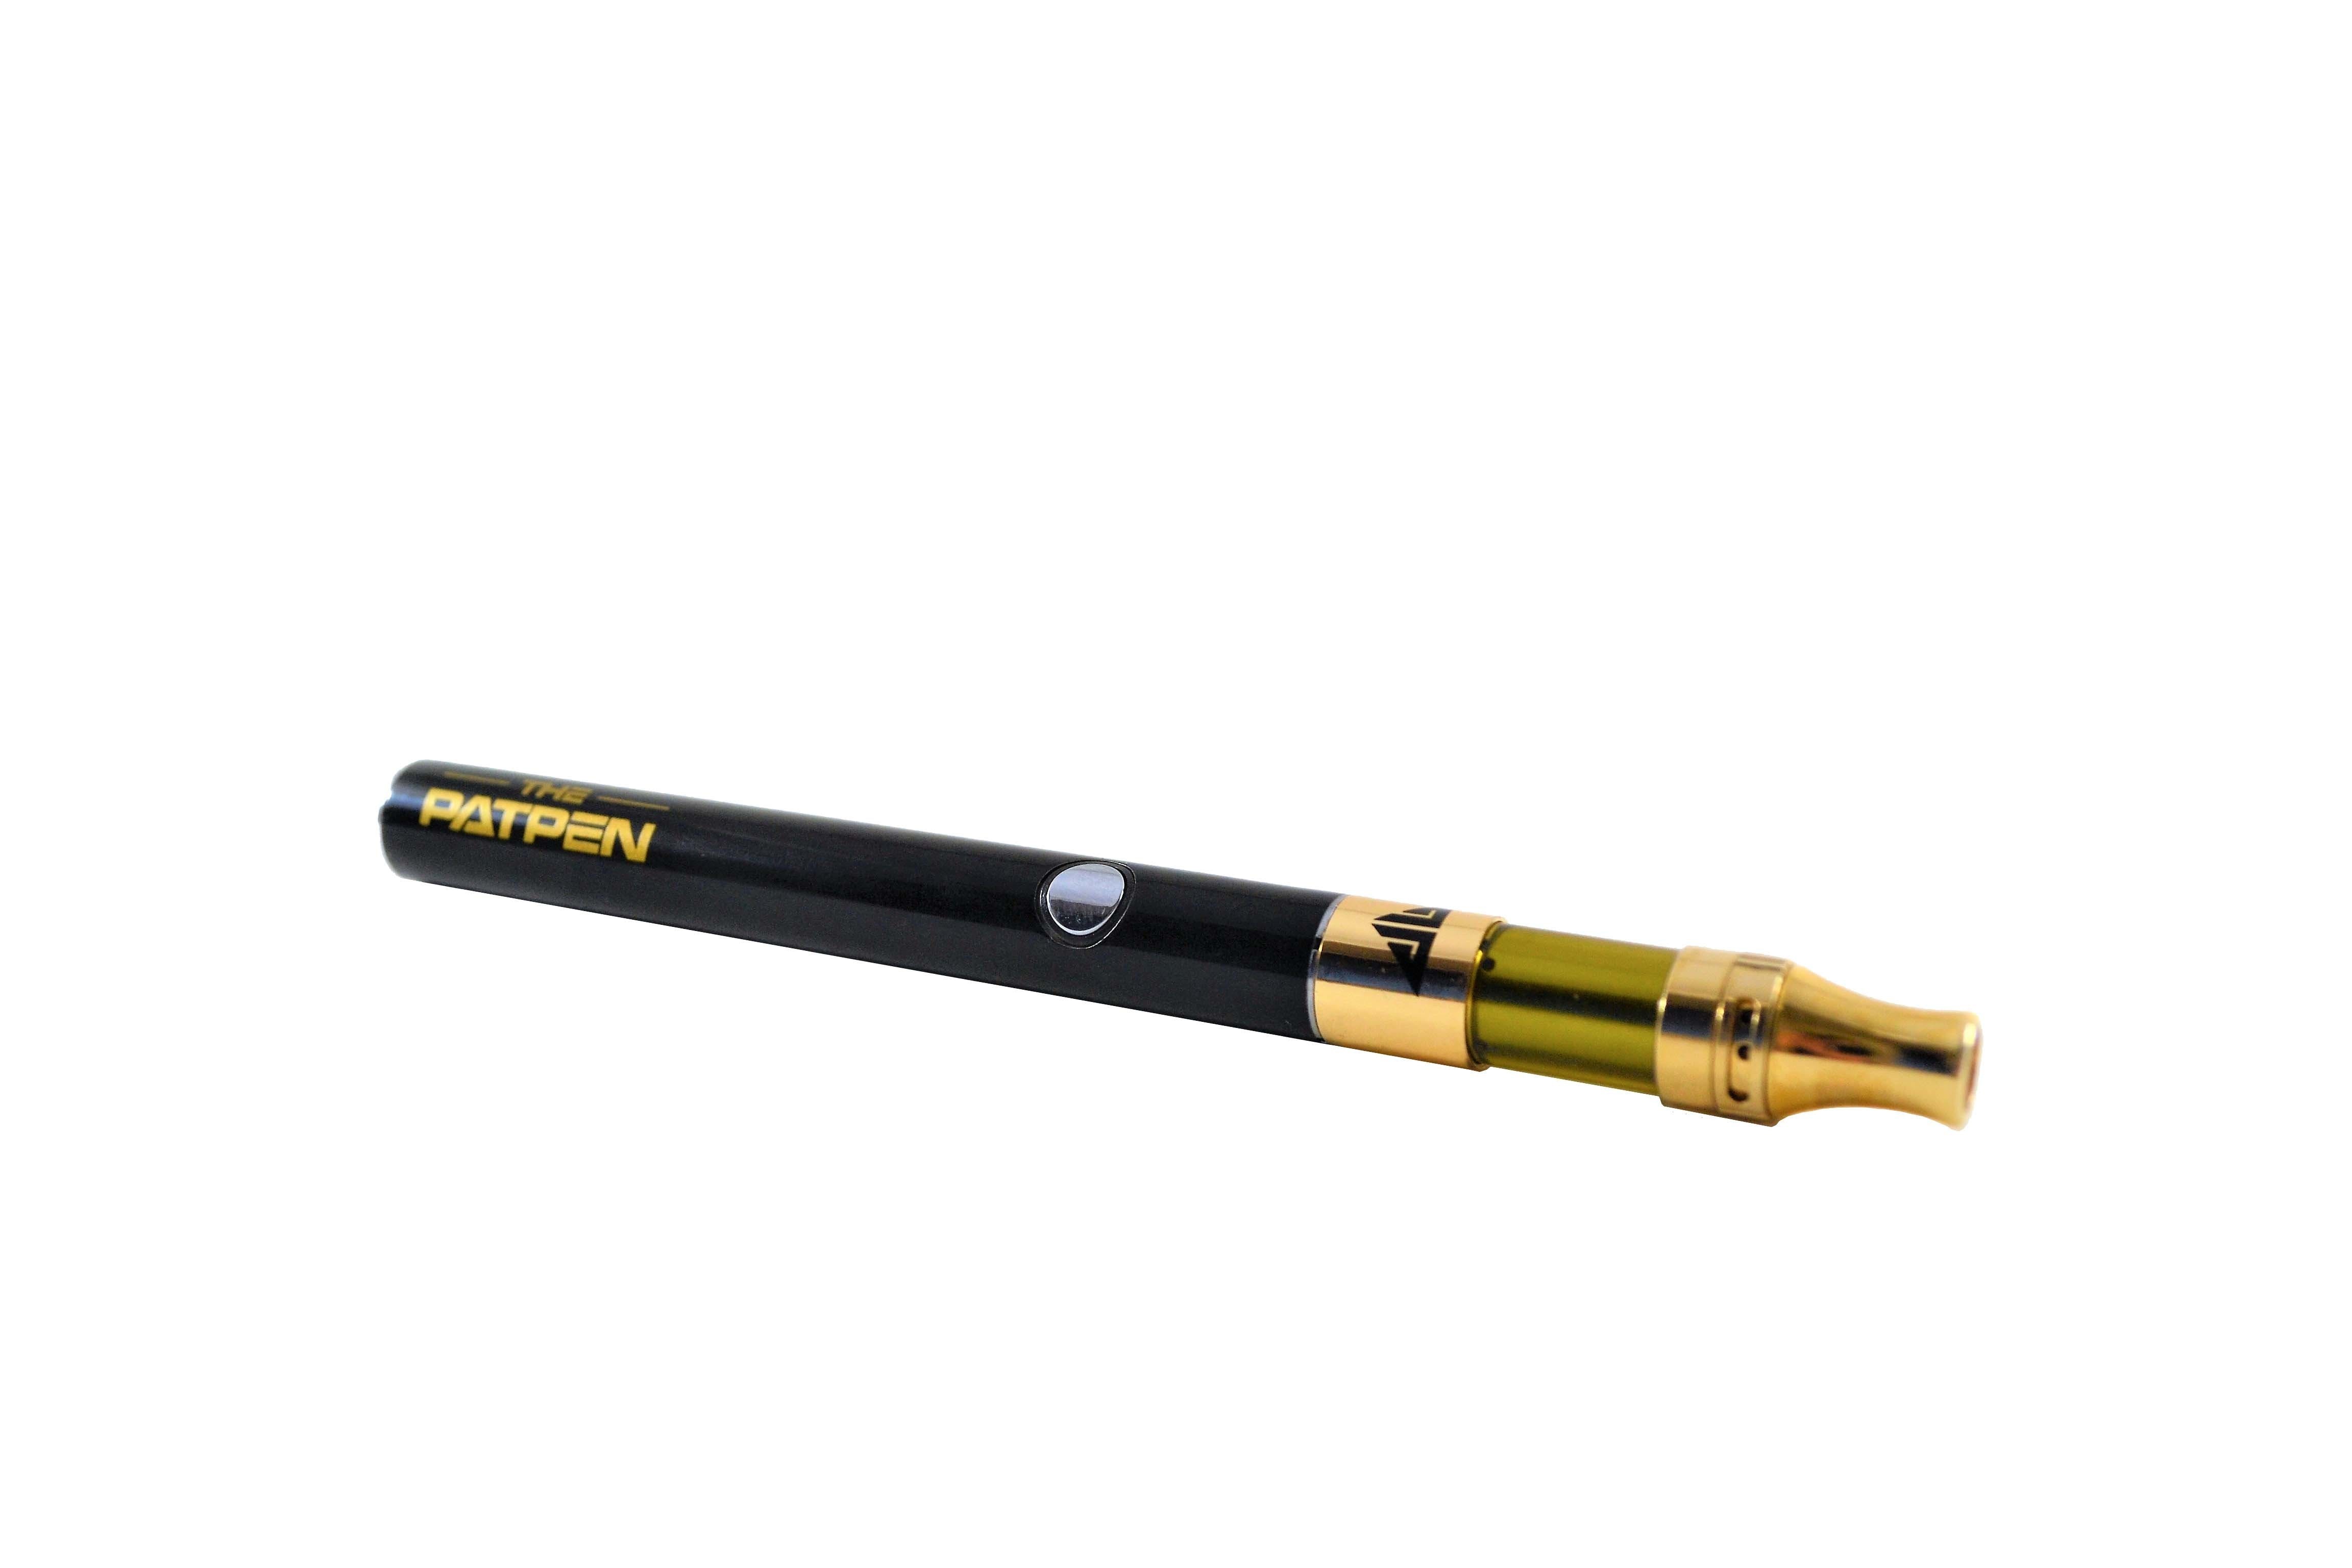 concentrate-the-pat-pen-500-mg-adjustable-airflow-cartridge